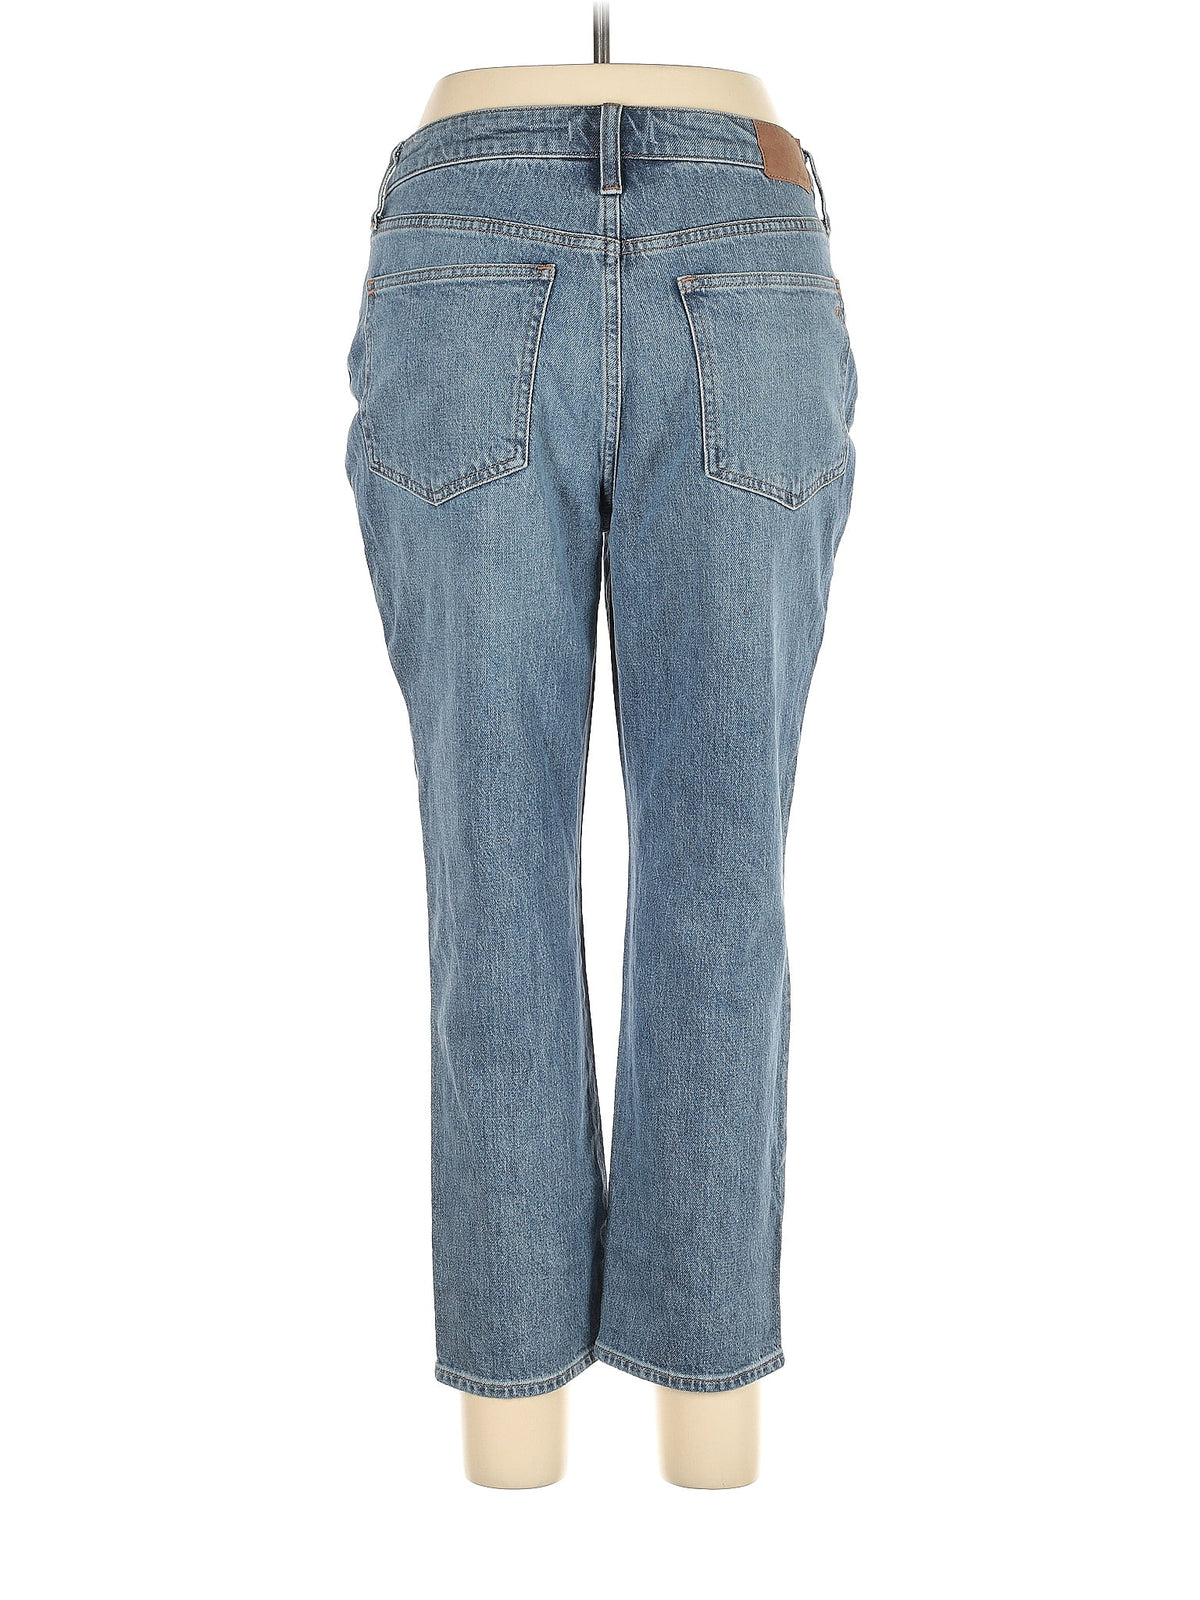 High-Rise Straight-leg Jeans in Light Wash waist size - 30 P